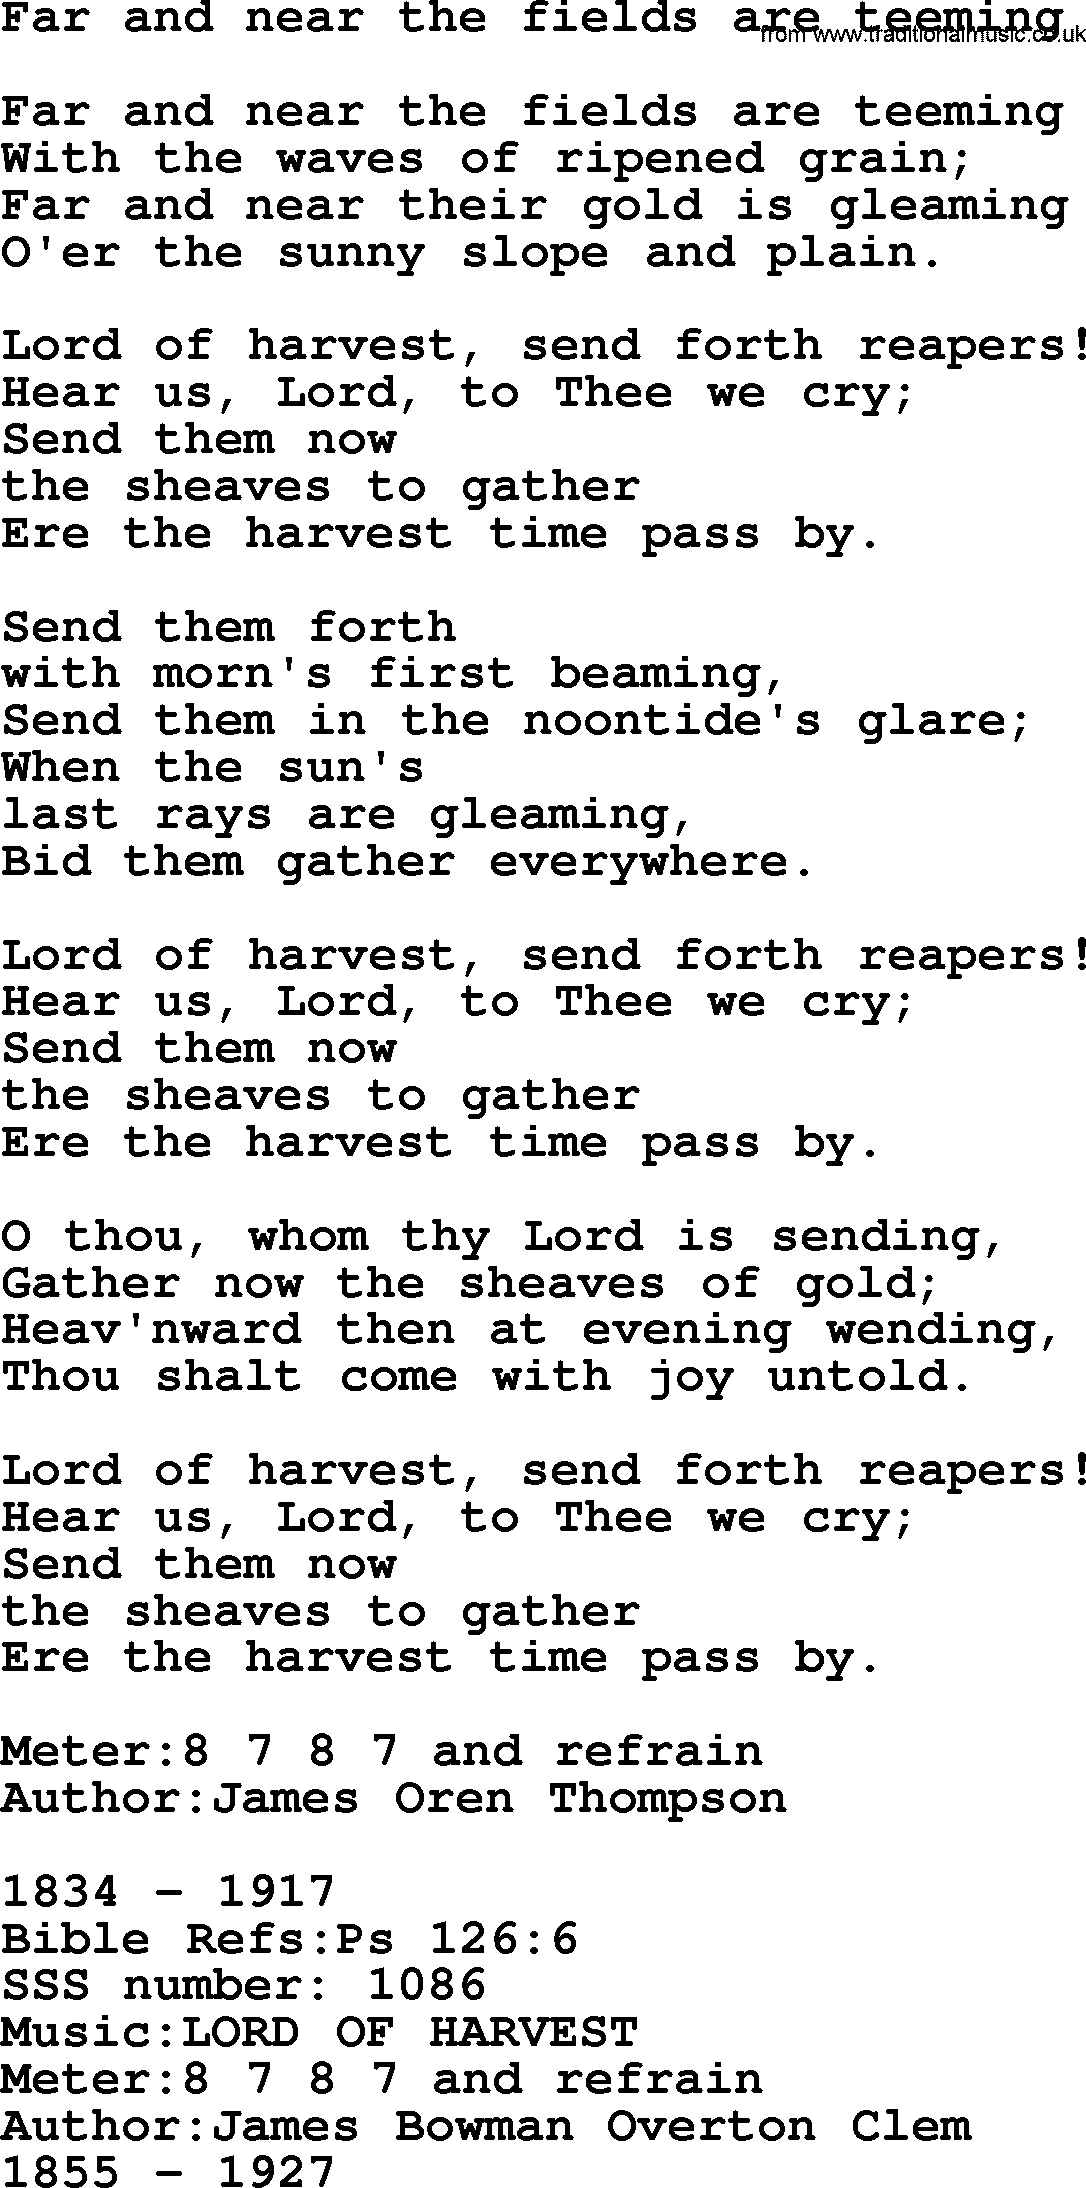 Sacred Songs and Solos complete, 1200 Hymns, title: Far And Near The Fields Are Teeming, lyrics and PDF